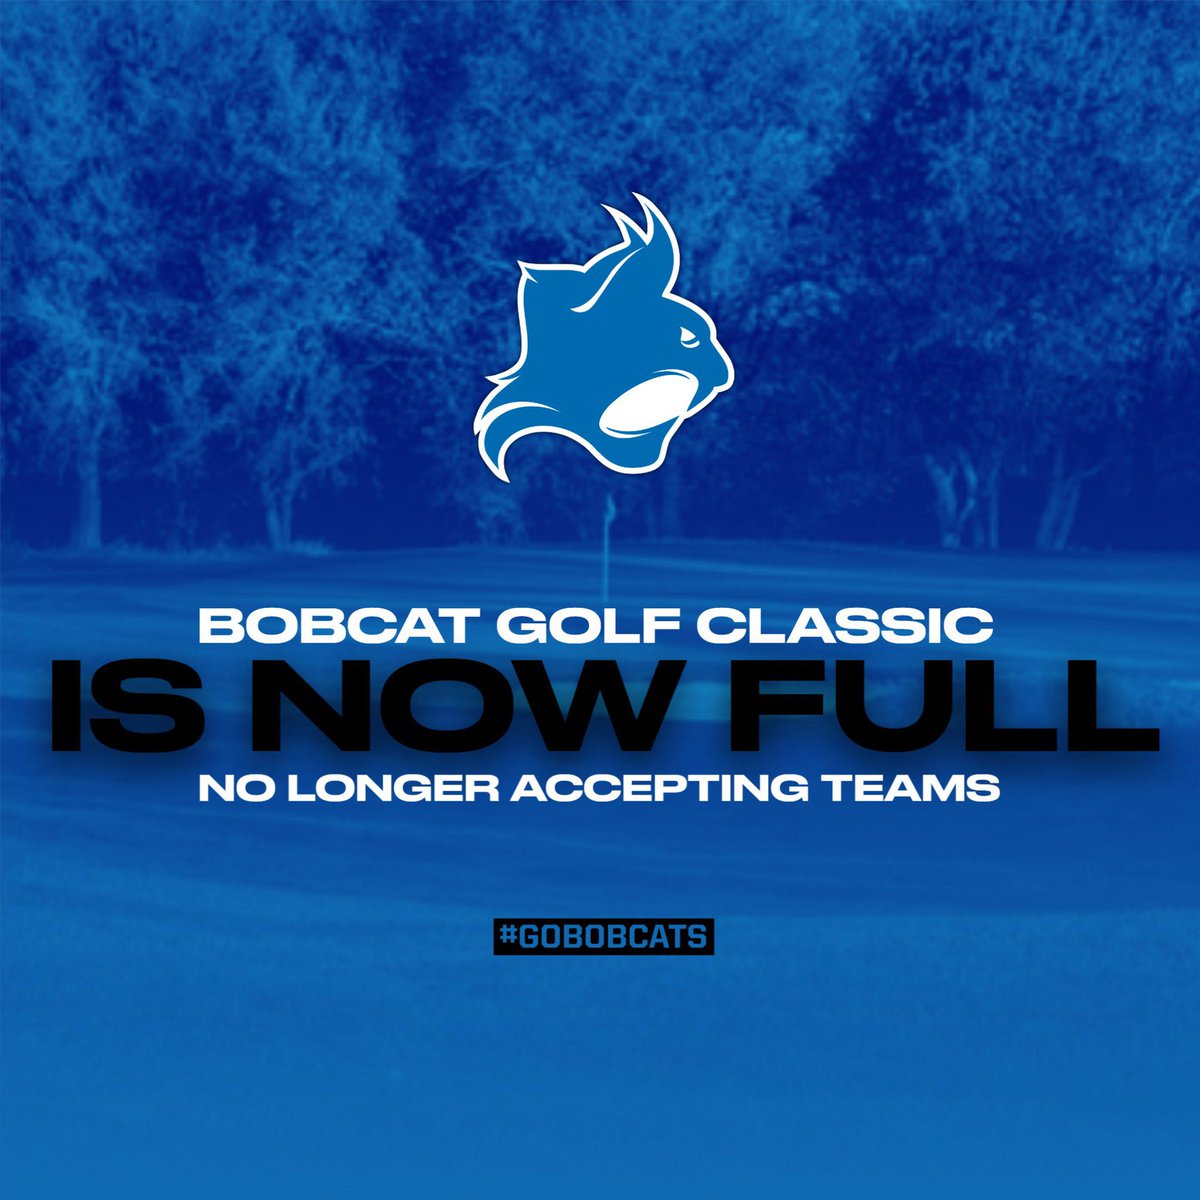 THE GOLF CLASSIC IS FULL! We will no longer be accepting teams for our 2024 Bobcat Golf Classic! We appreciate everyone that signed up and hope to expand the tournament in the years to come. #ClawsOut | #GoBobcats